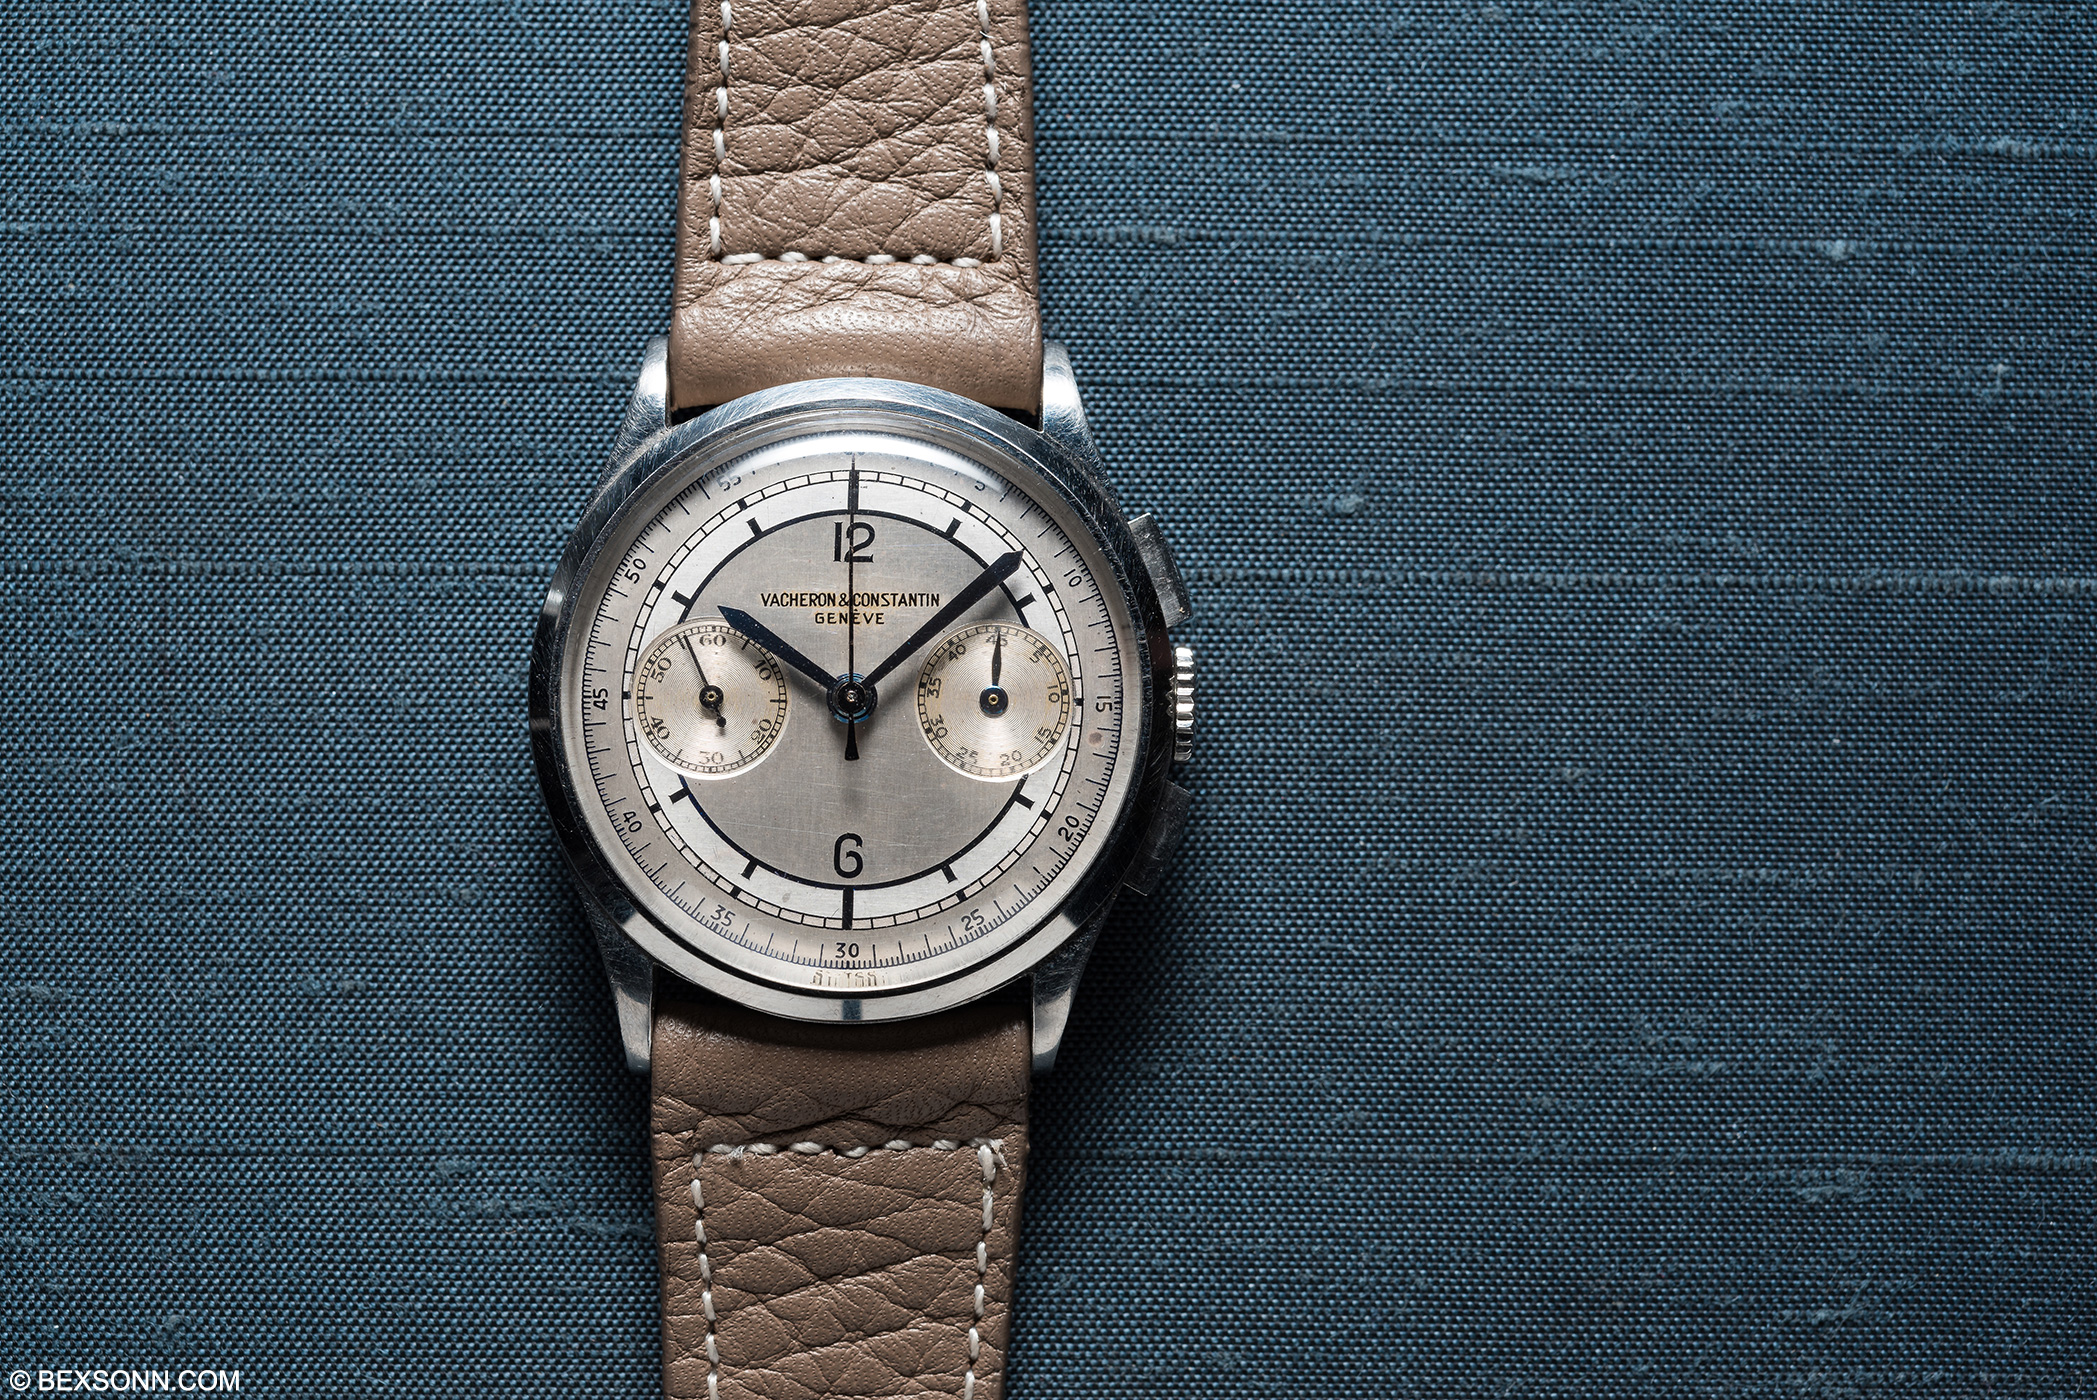 Vintage Watch Shopping: From Napoli With Love – BEXSONN